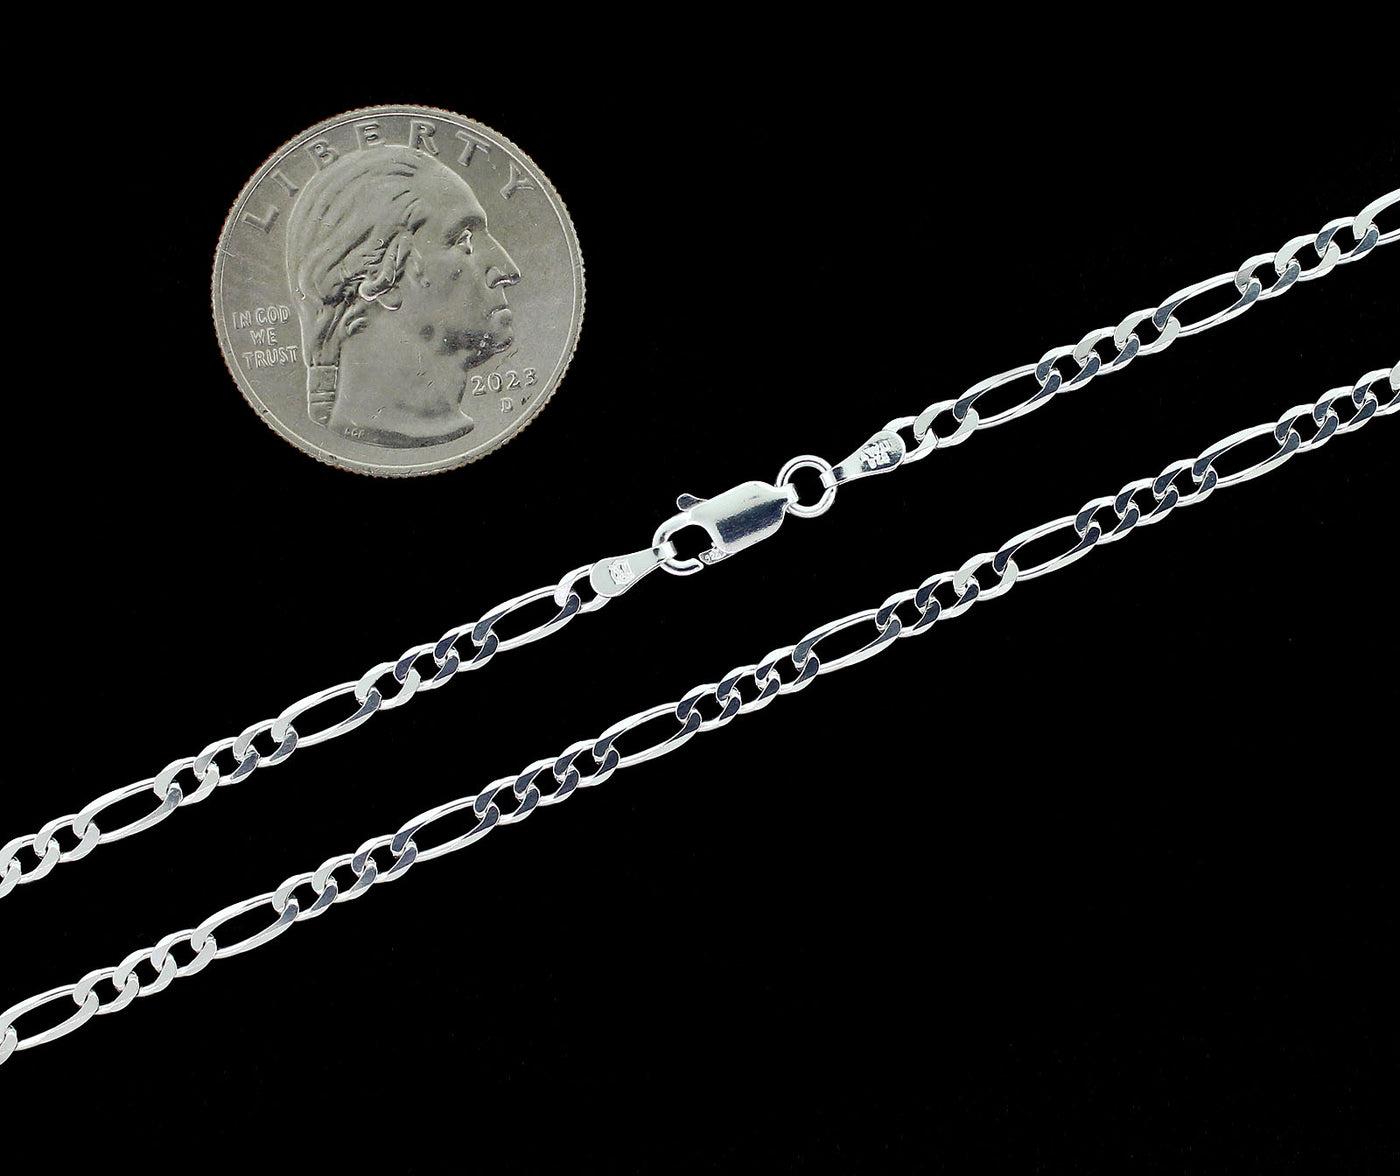 Real 3MM Solid 925 Sterling Silver Italian FIGARO LINK CHAIN Necklace UNISEX